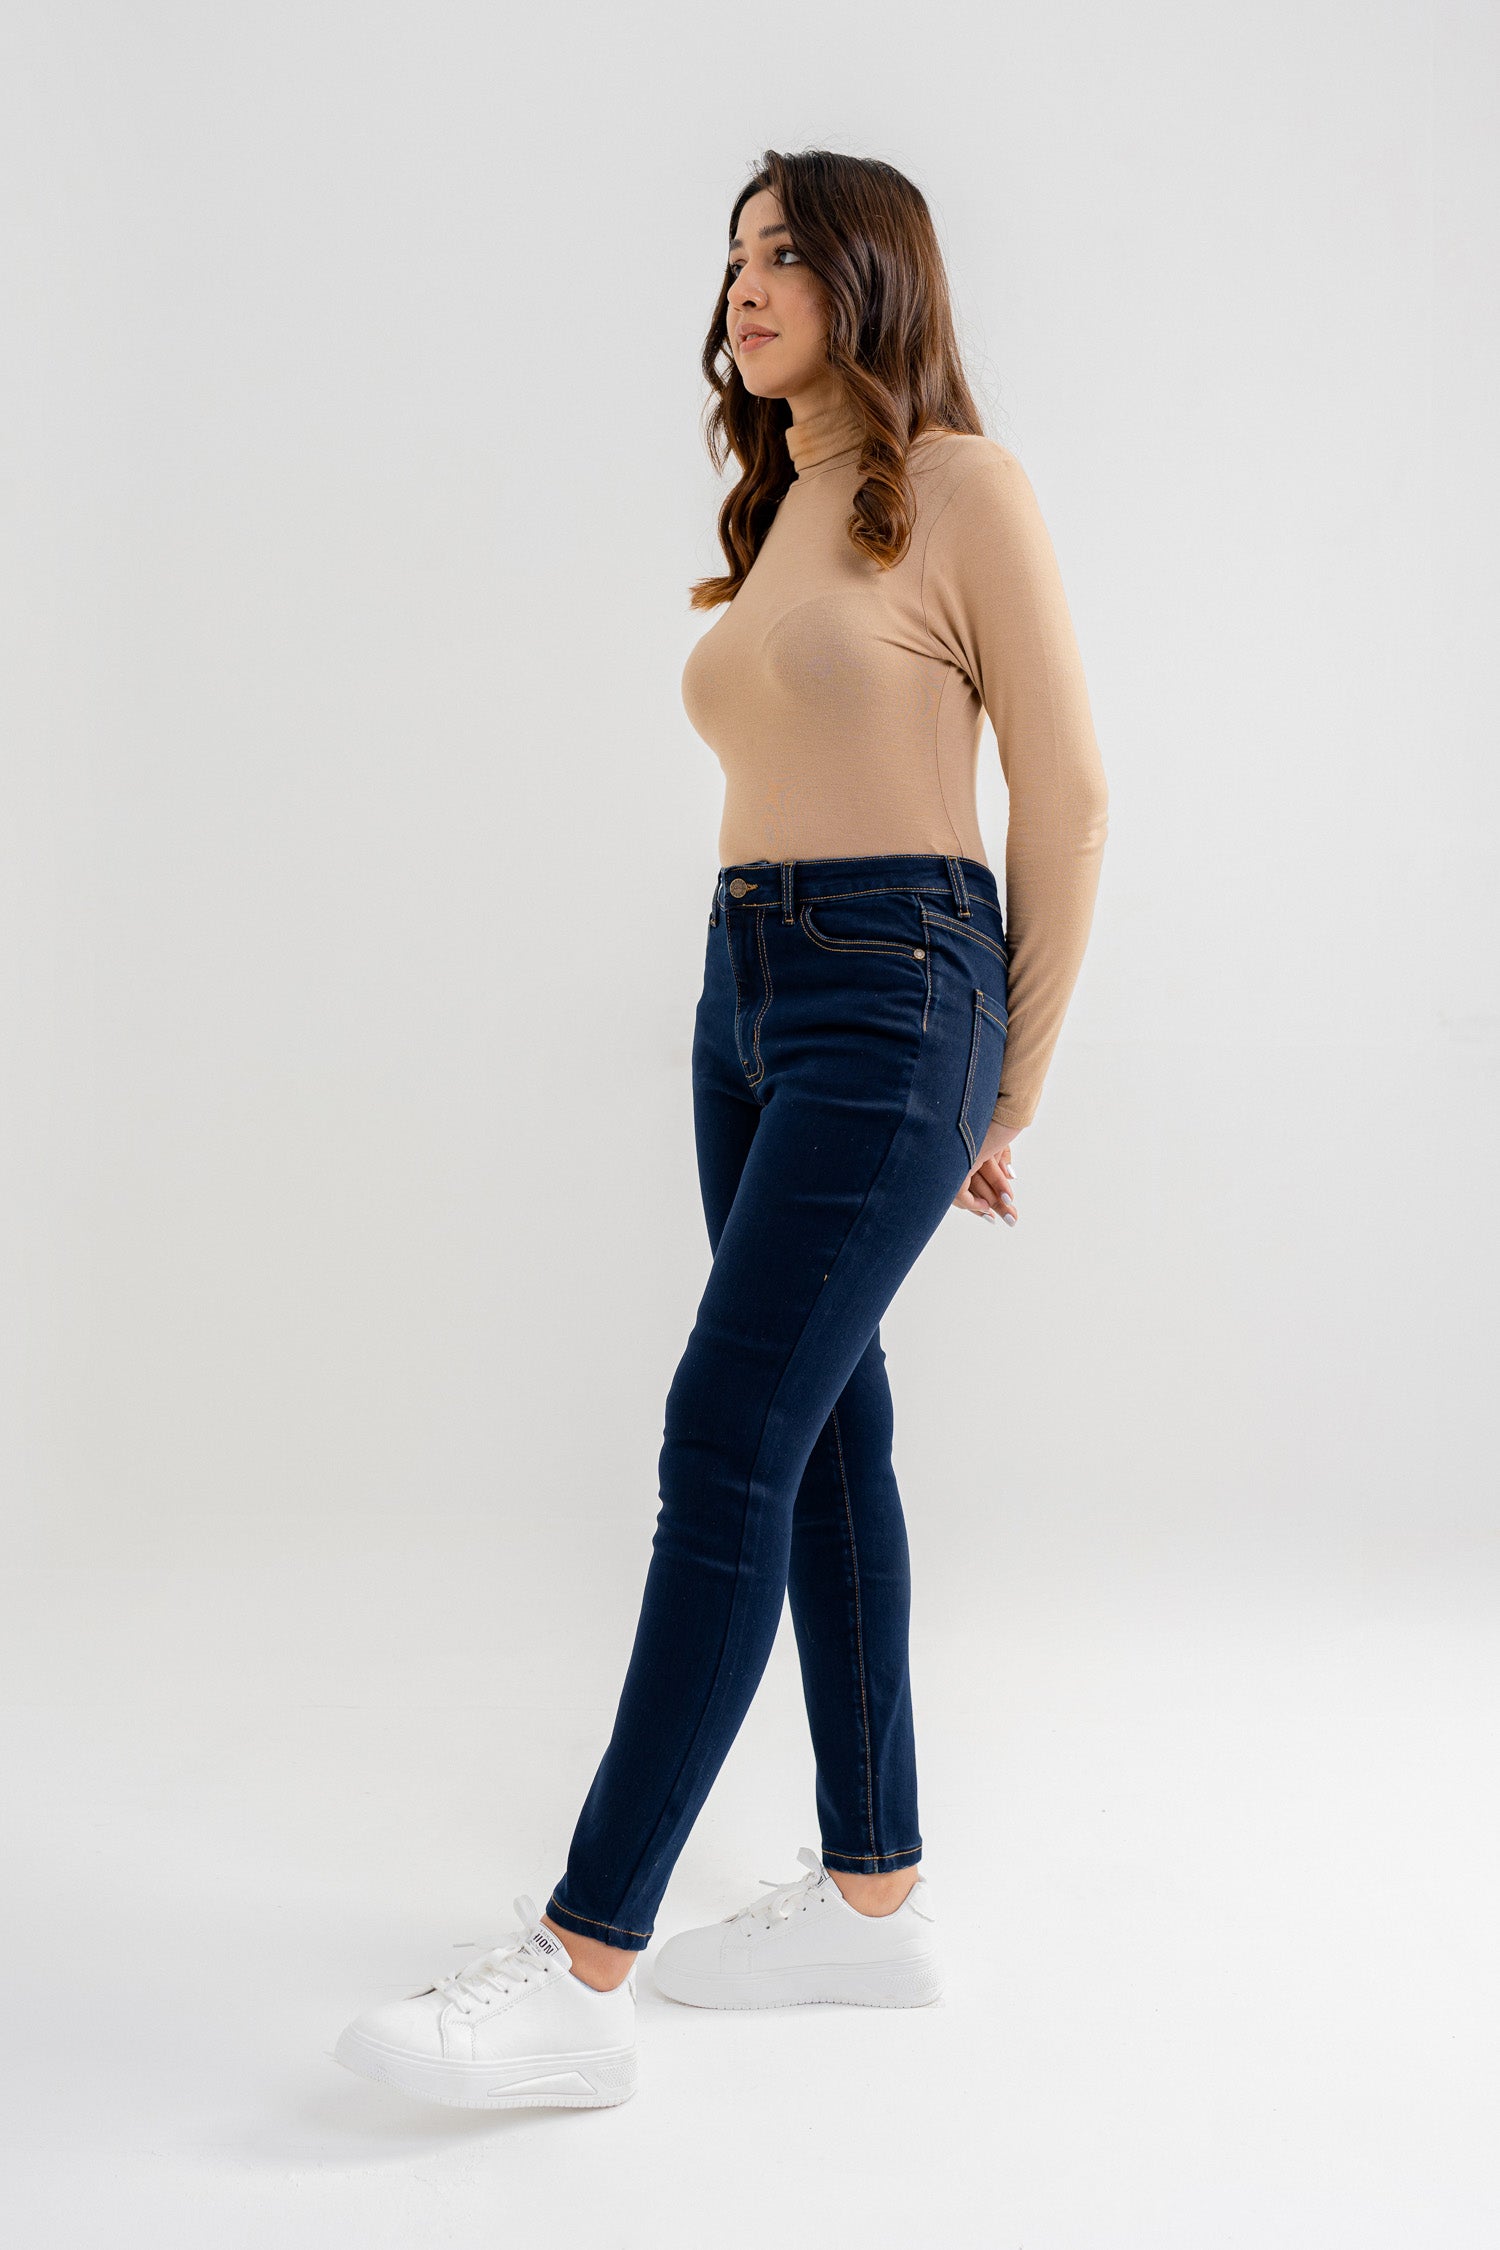 Amyra Basic Fit Jeans